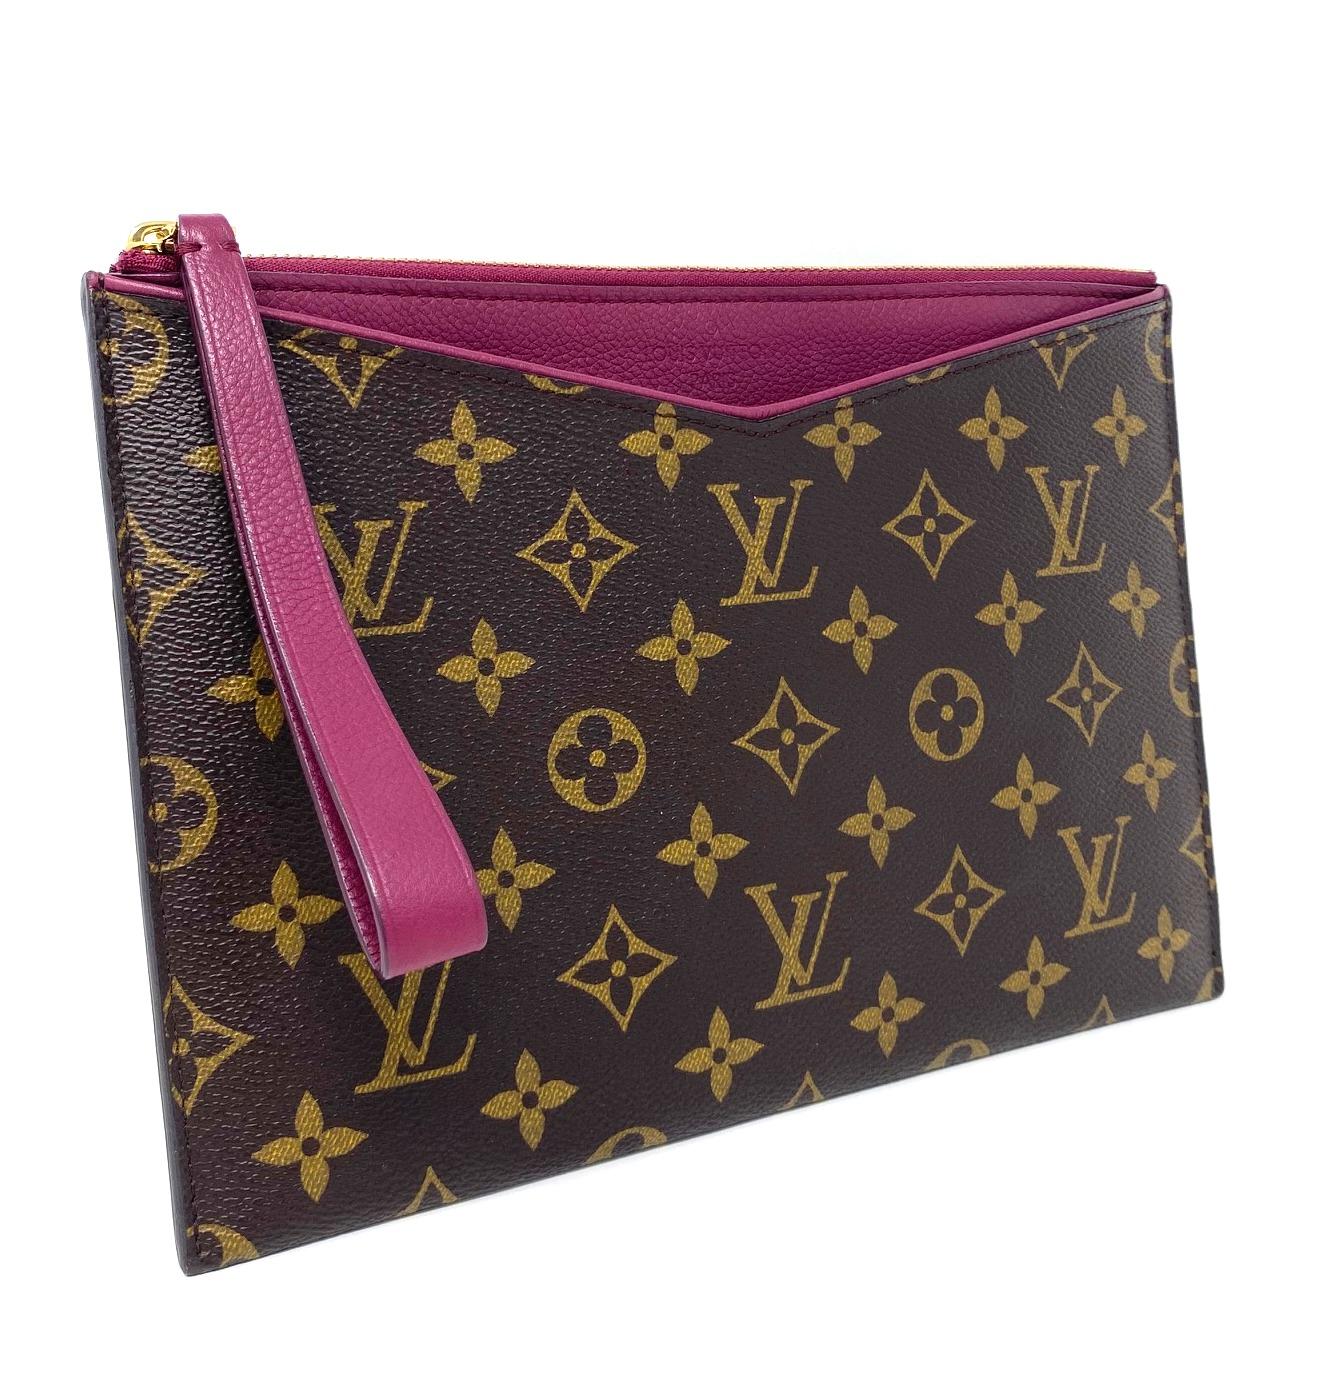 Company-Louis Vuitton 
Style-Grape Pochette Pallas Monogram Leather Canvas Clutch 
Outside -No Rips , Tear or Marks 
Inside -No rips, marks or tears
Pockets-Card Holders 
Date Code-MI4193 
Handles/ Straps-5.5